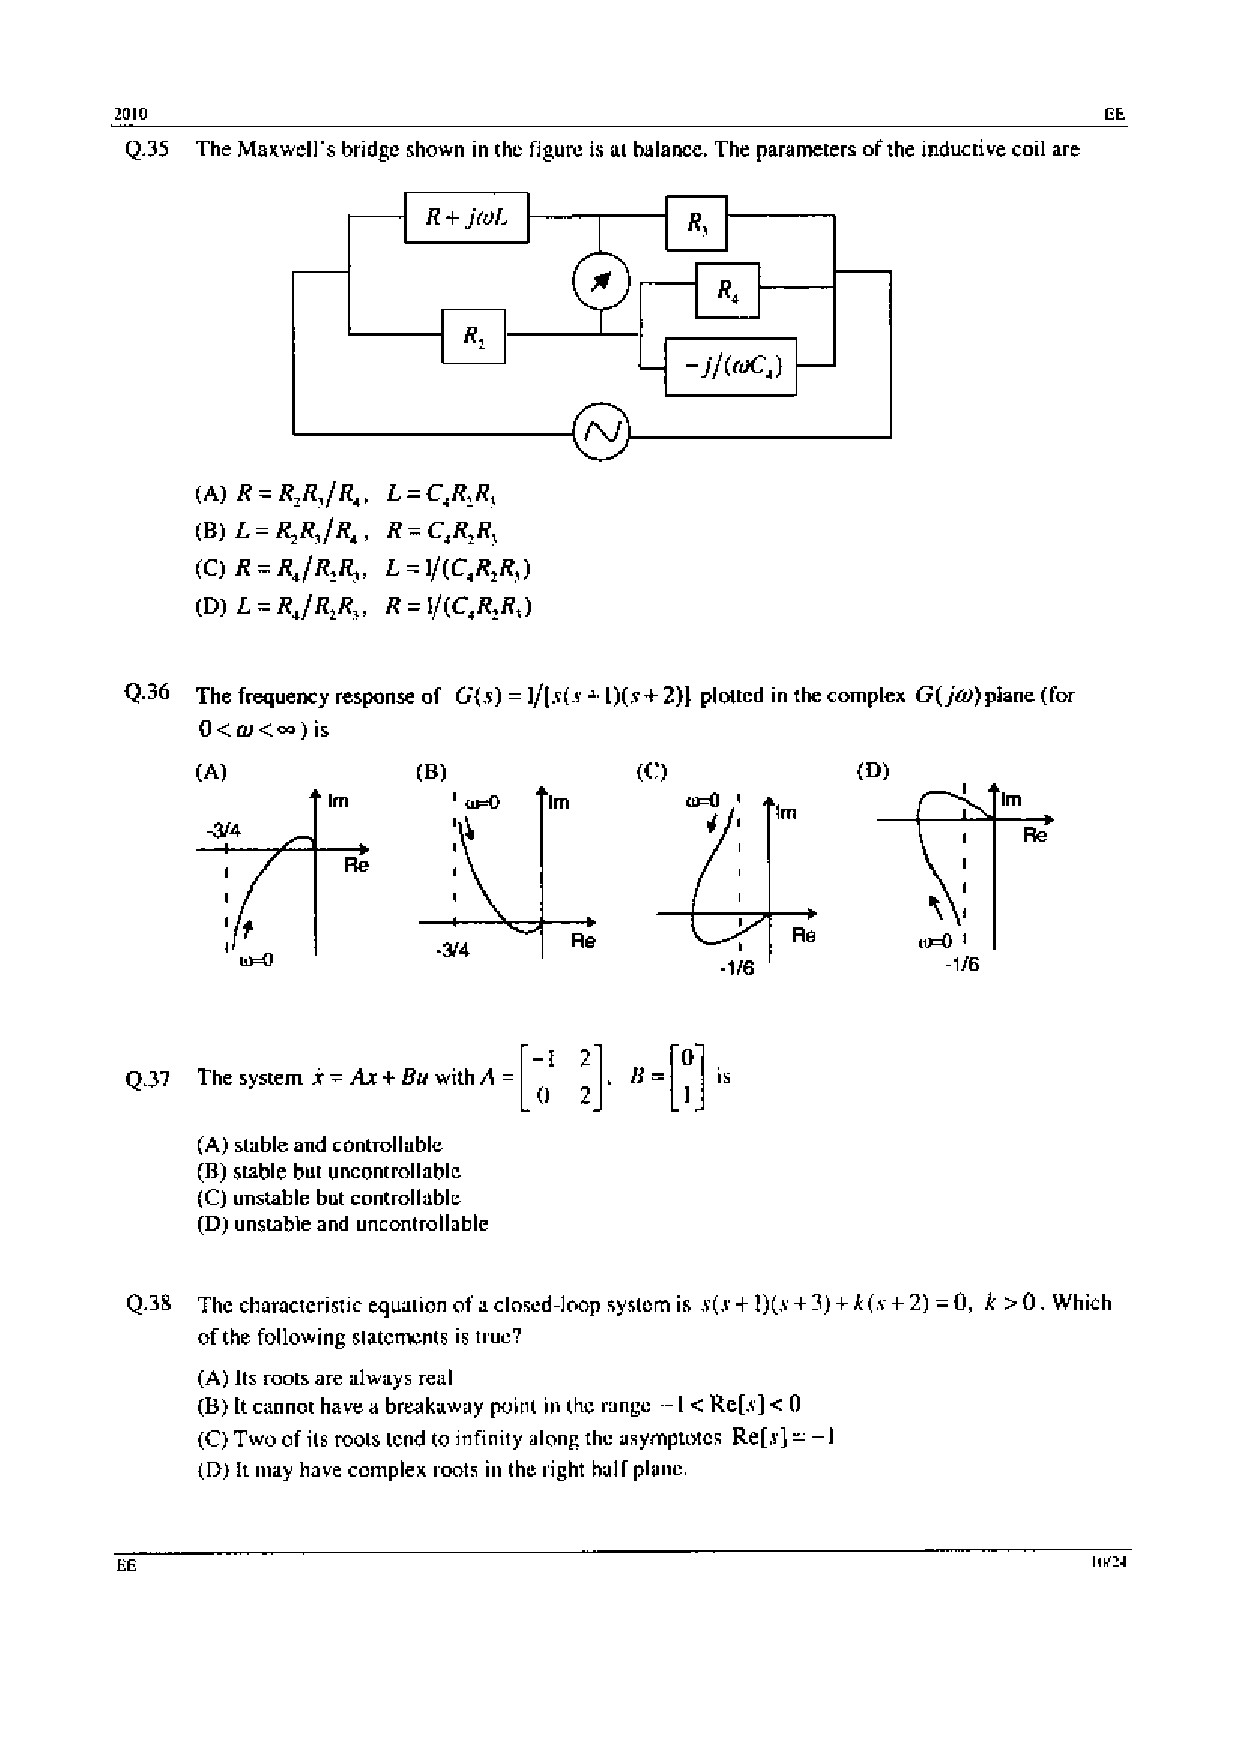 GATE Exam Question Paper 2010 Electrical Engineering 10